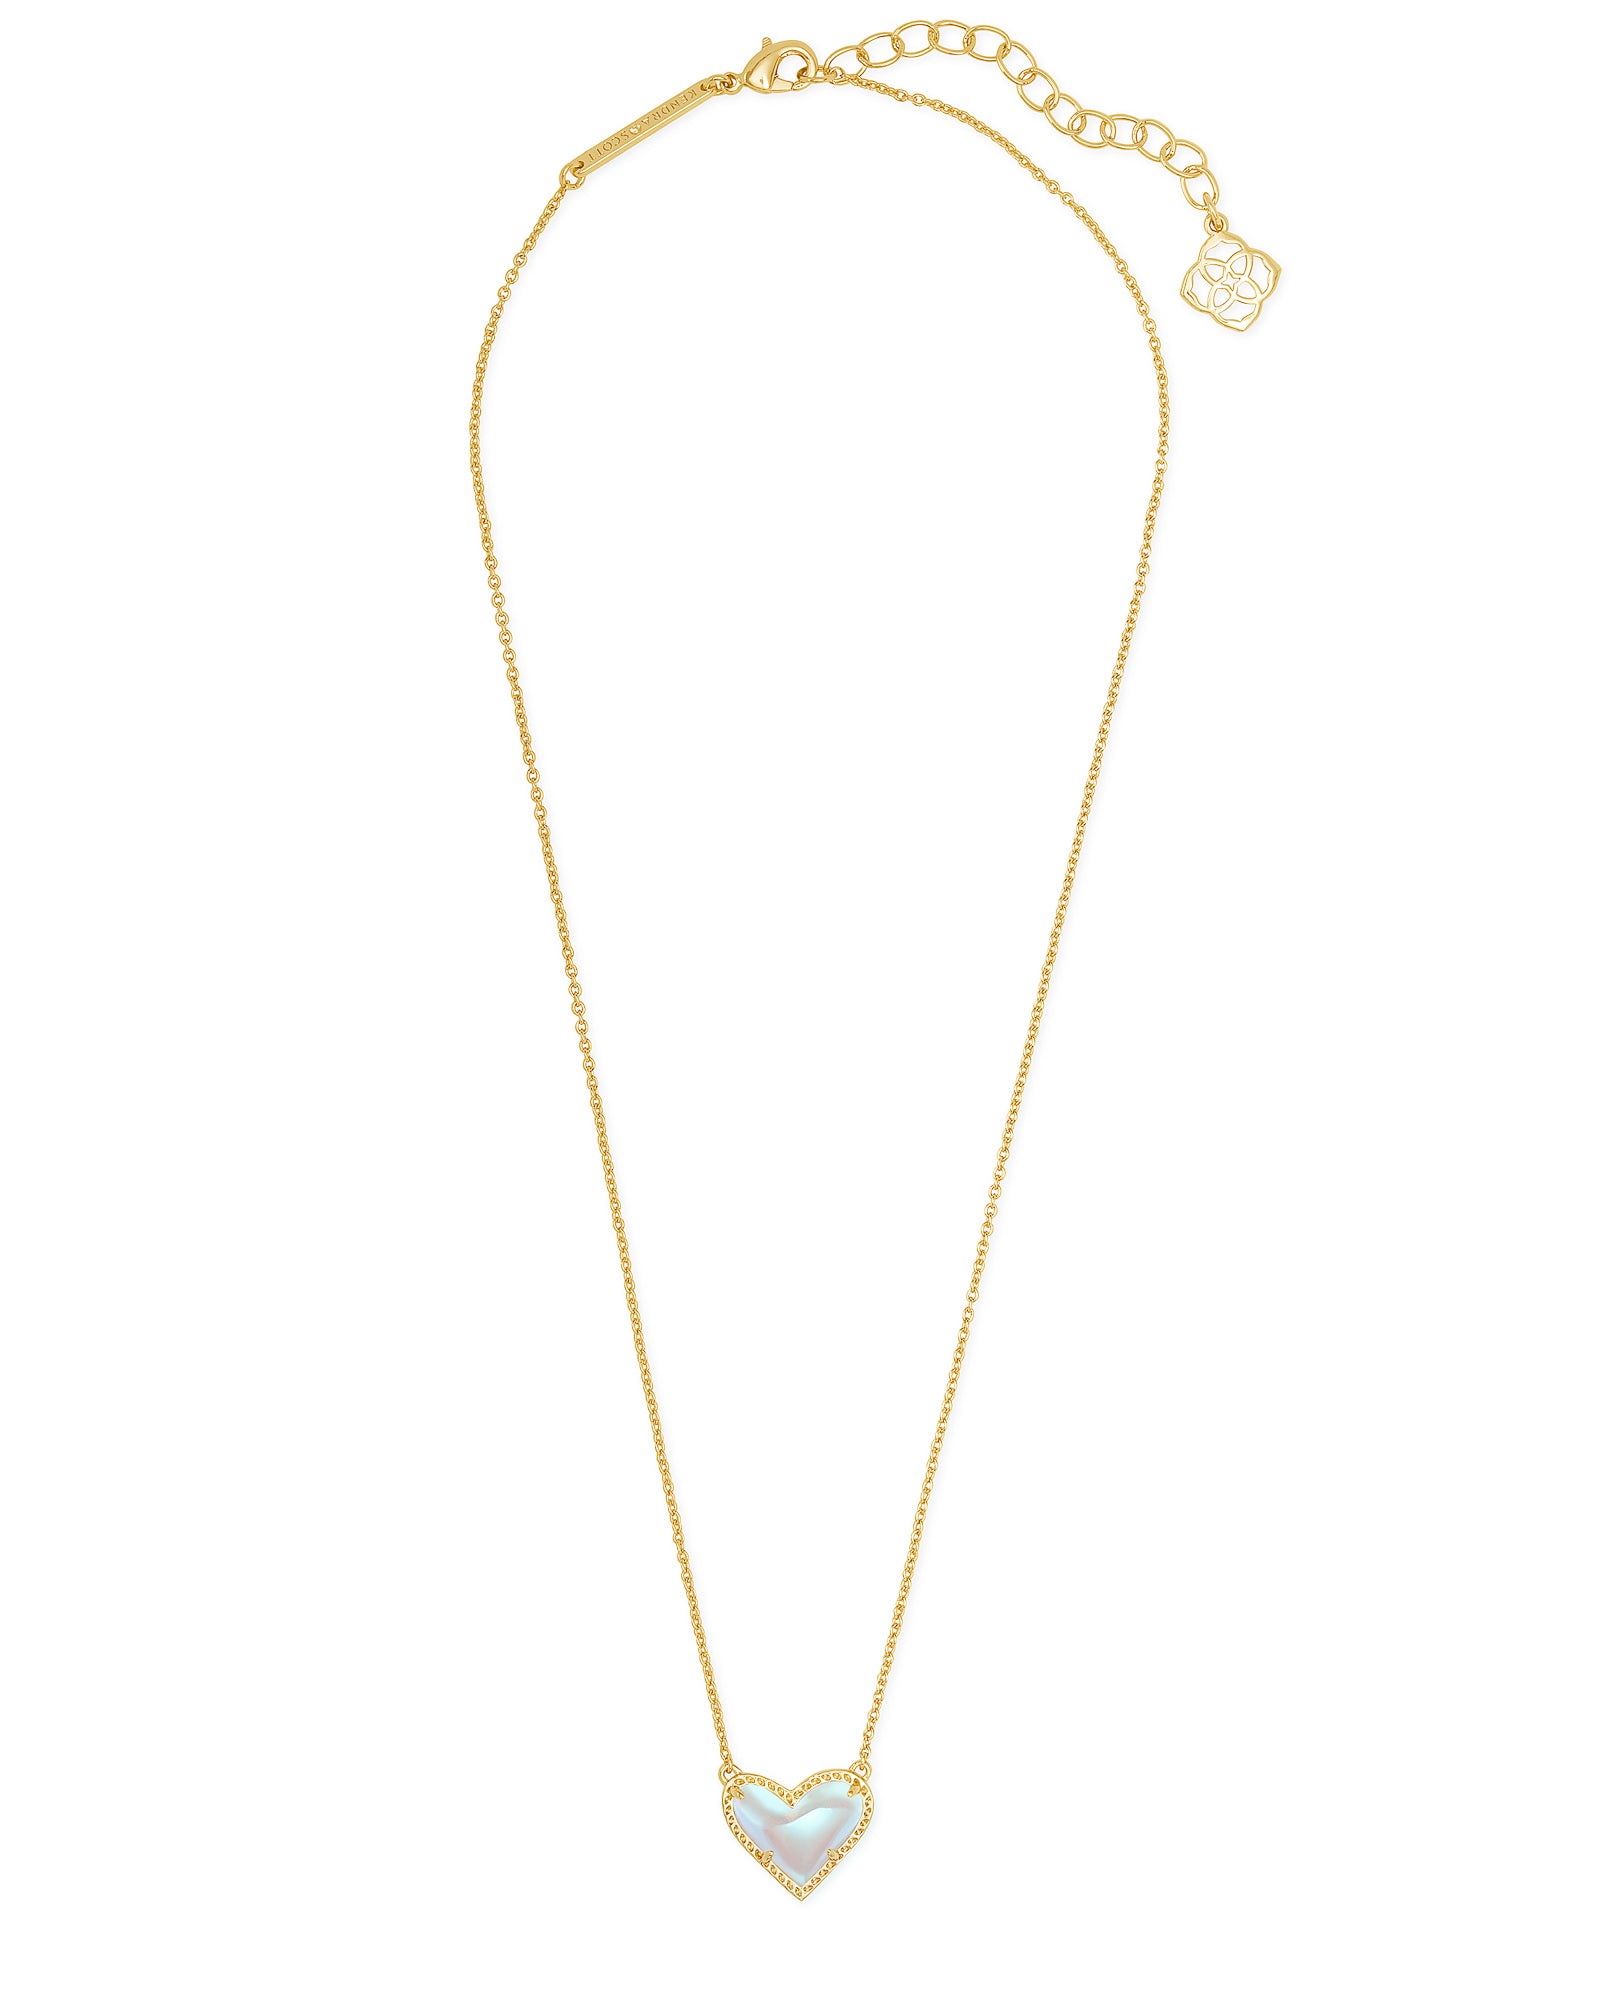 Kendra Scott | Ari Heart Gold Pendant Necklace in Dichroic Glass - Giddy Up Glamour Boutique